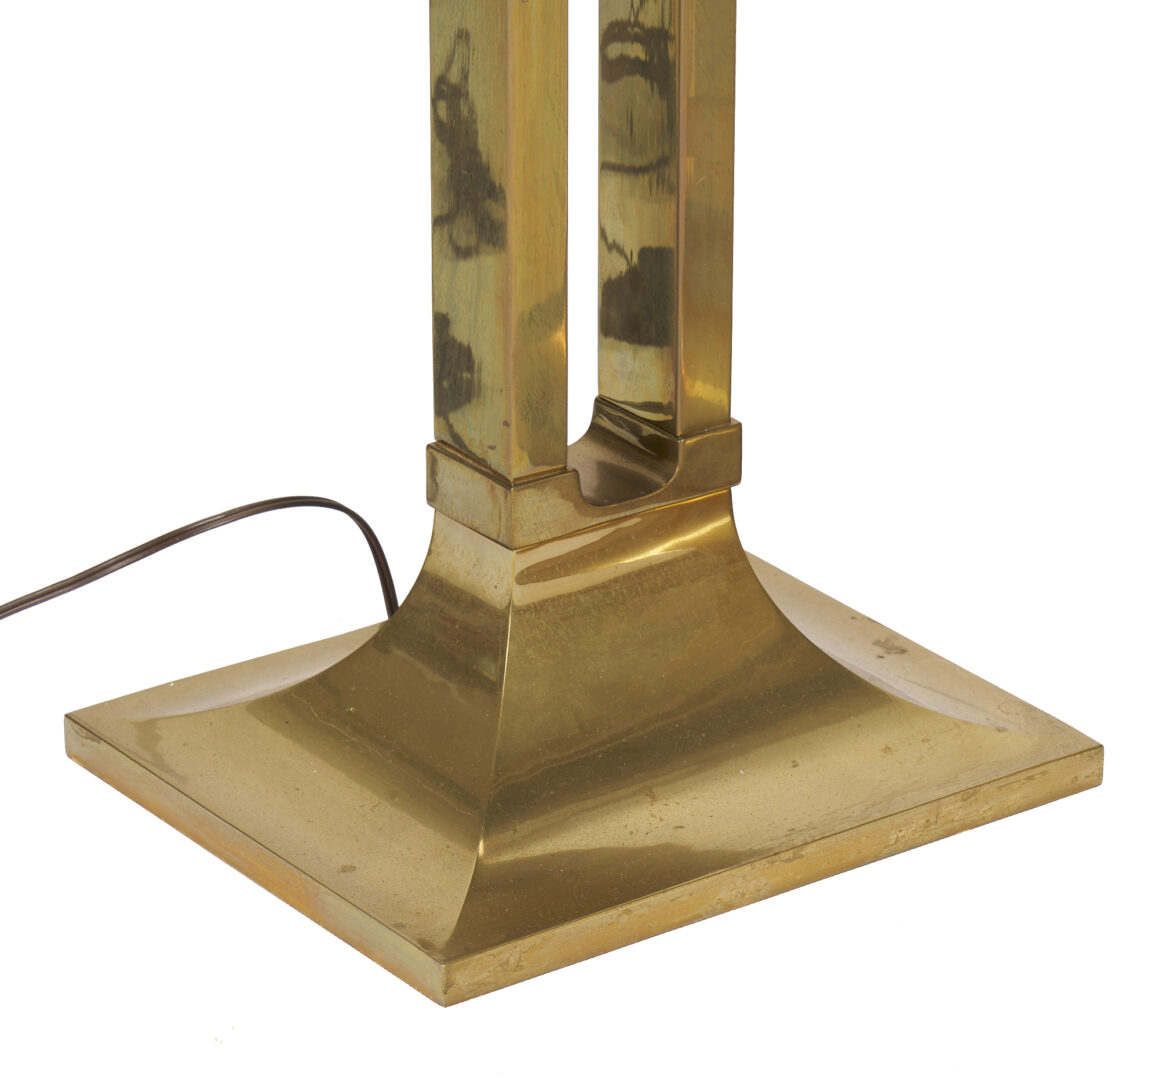 Lot 406: Pair of Contemporary Solid Brass Floor Lamps, Chapman